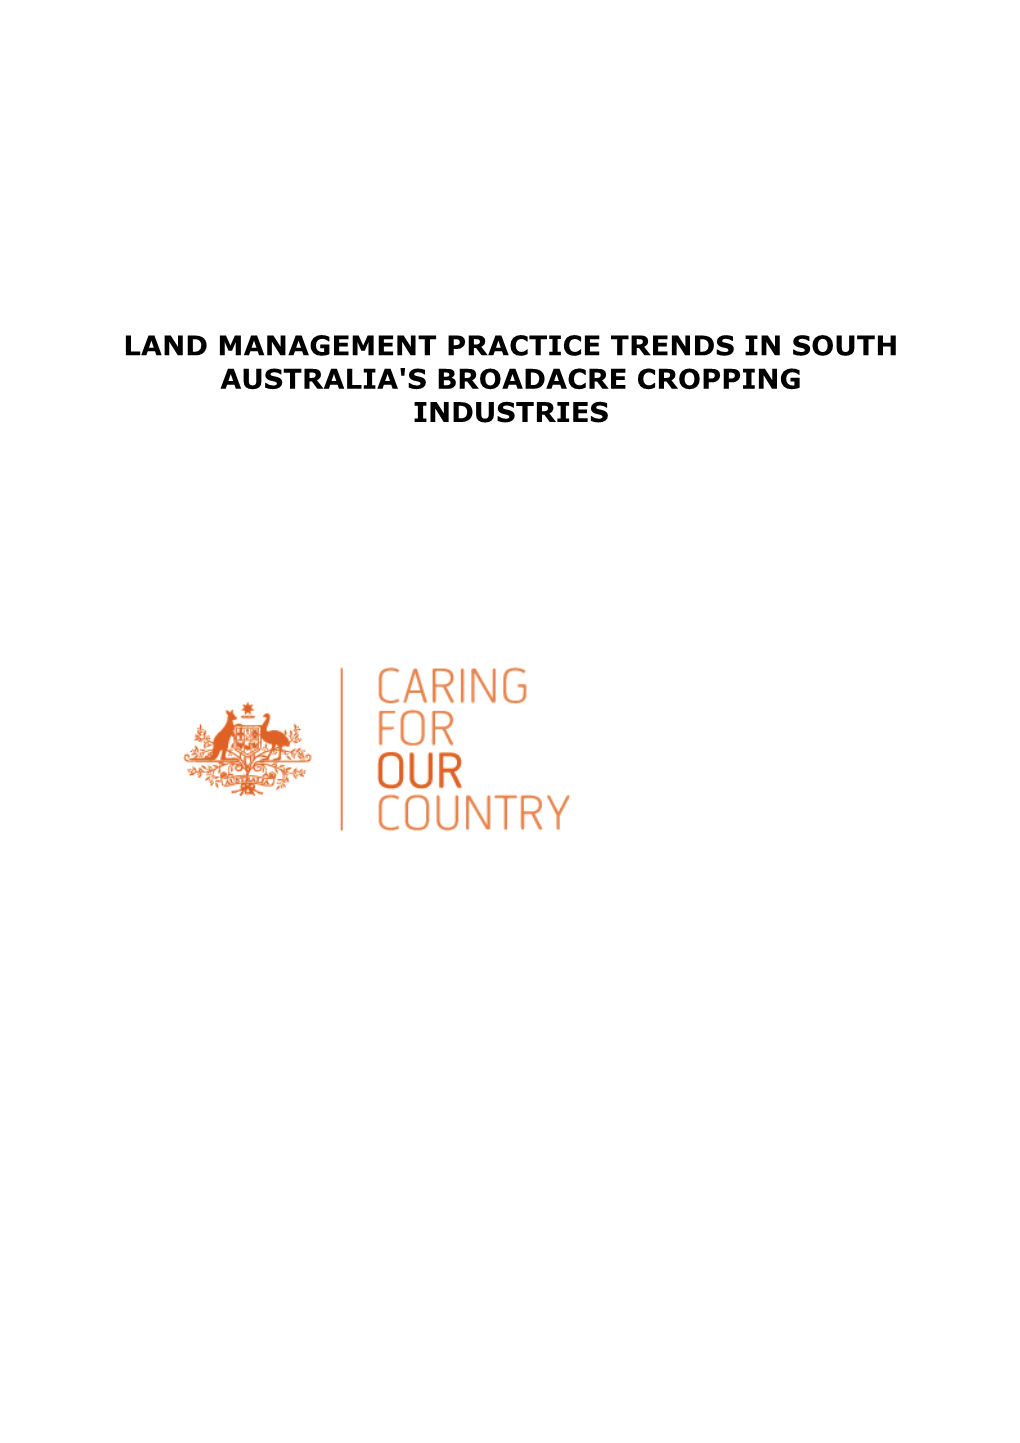 Land Management Practice Trends in South Australia's Broadacre Cropping Industries